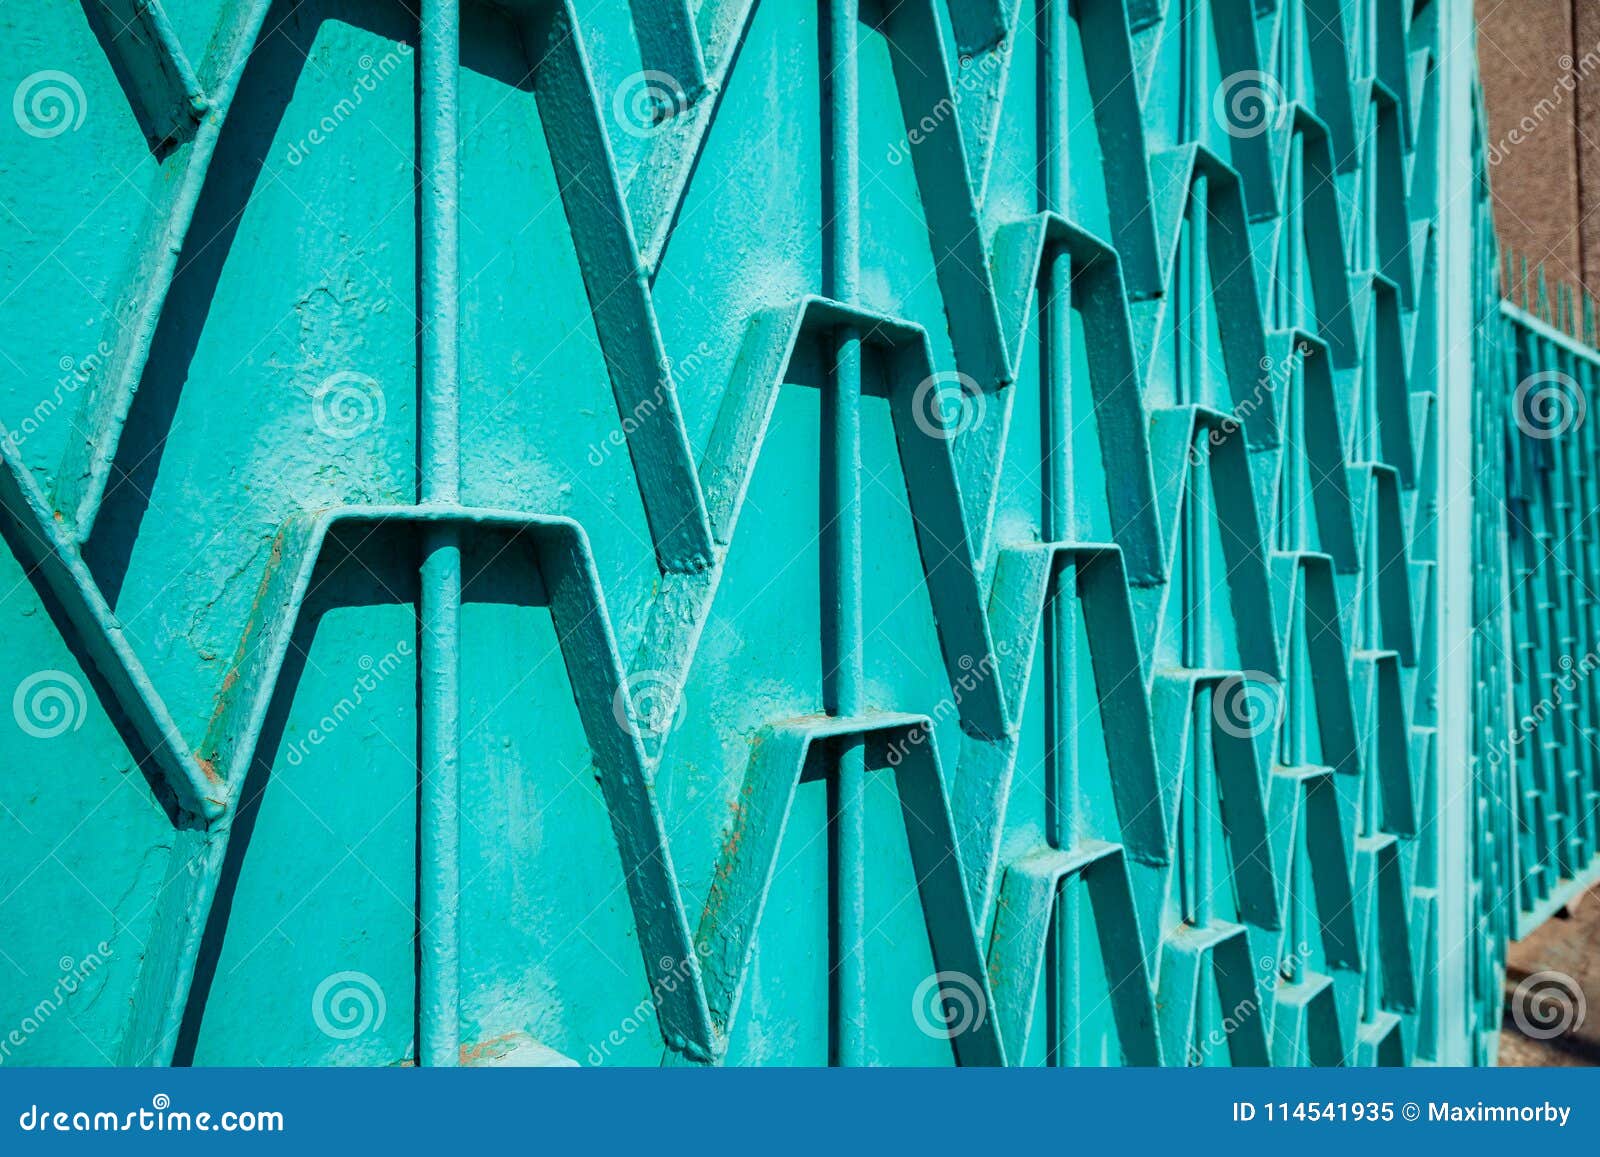 Decorative parts of metal gates. Metal turquois fence. Texture of old metal background. Geometric pattern Concept: creative